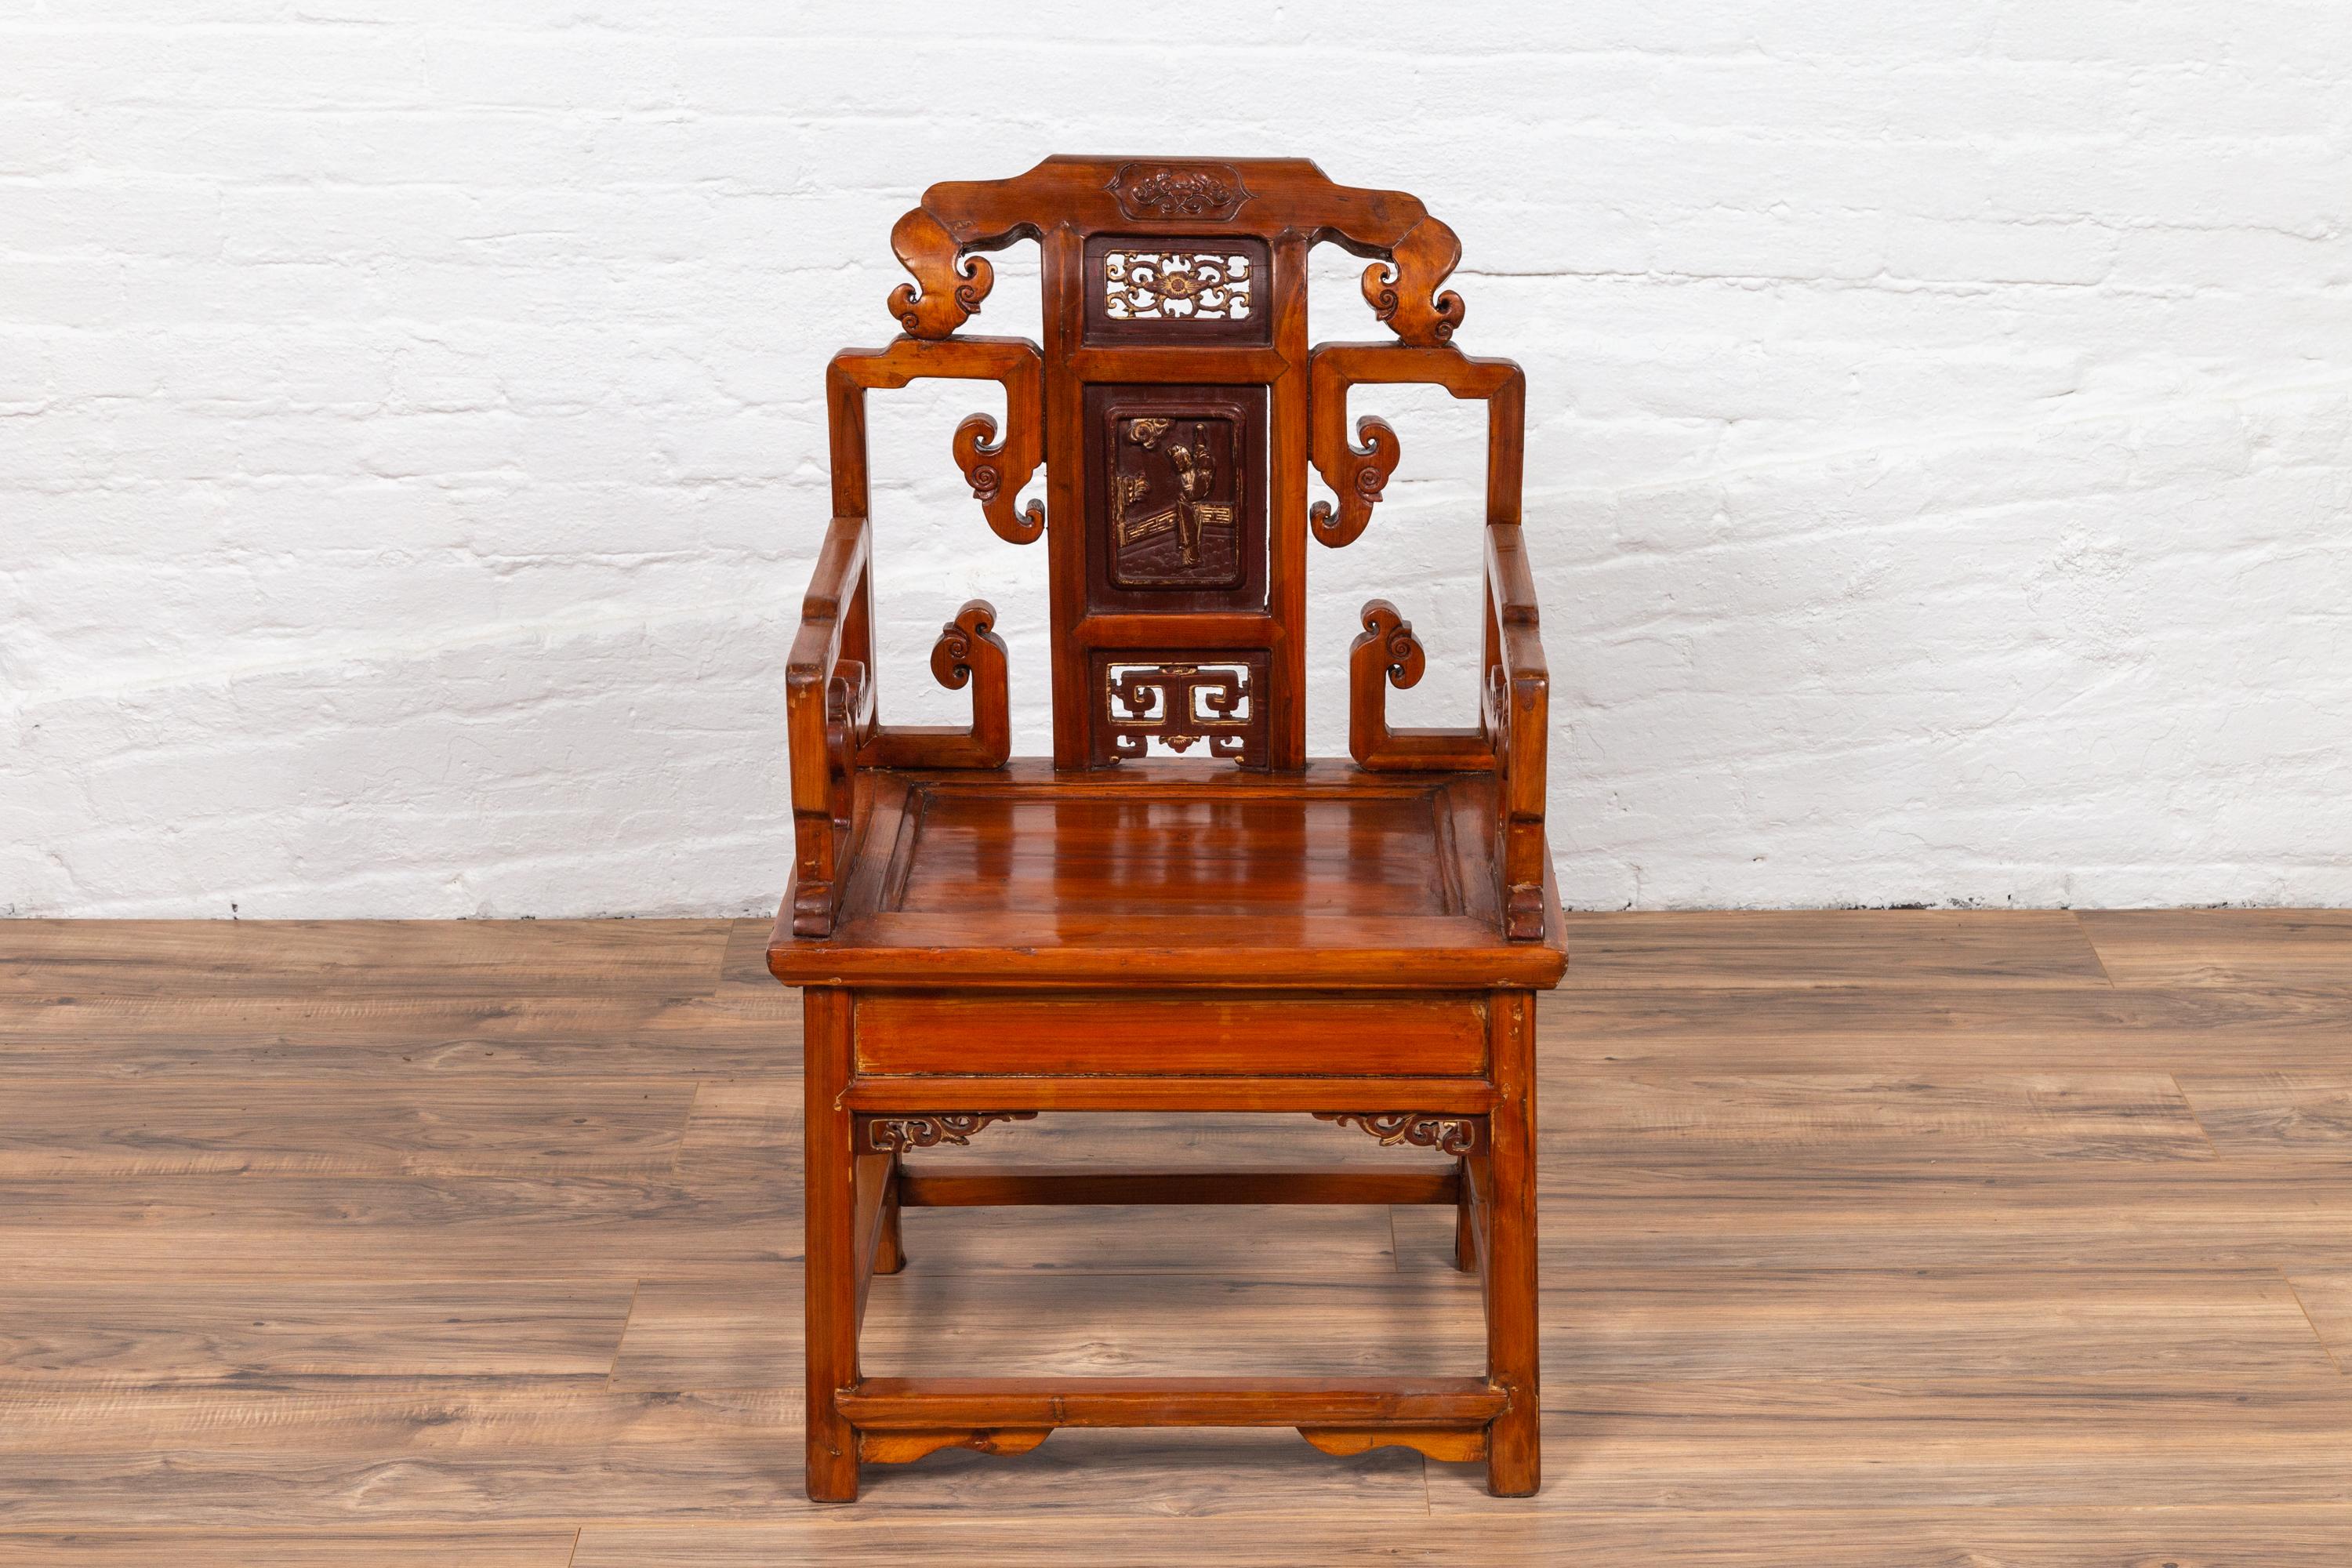 An antique Chinese wooden chair from the 19th century, with hand carved panels, red and gold accents and natural wood patina. This Chinese chair captures our attention with its exquisite silhouette and intricate carving. Our eye is immediately drawn